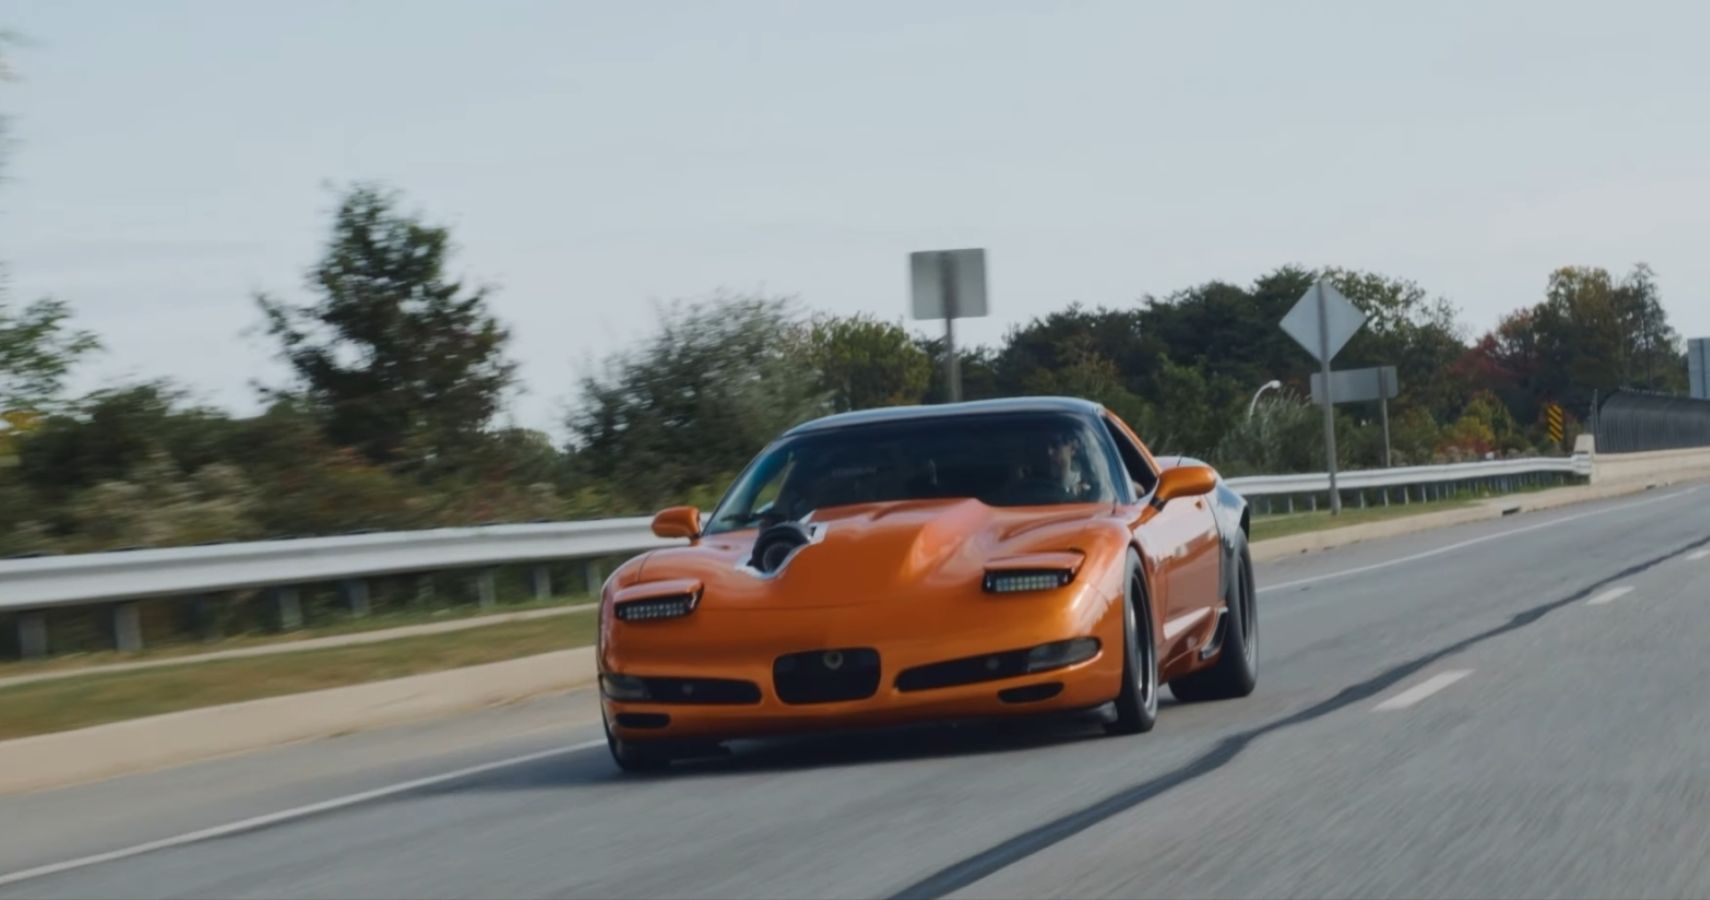 Budget Build: This C5 Corvette Is A Certified Ripper